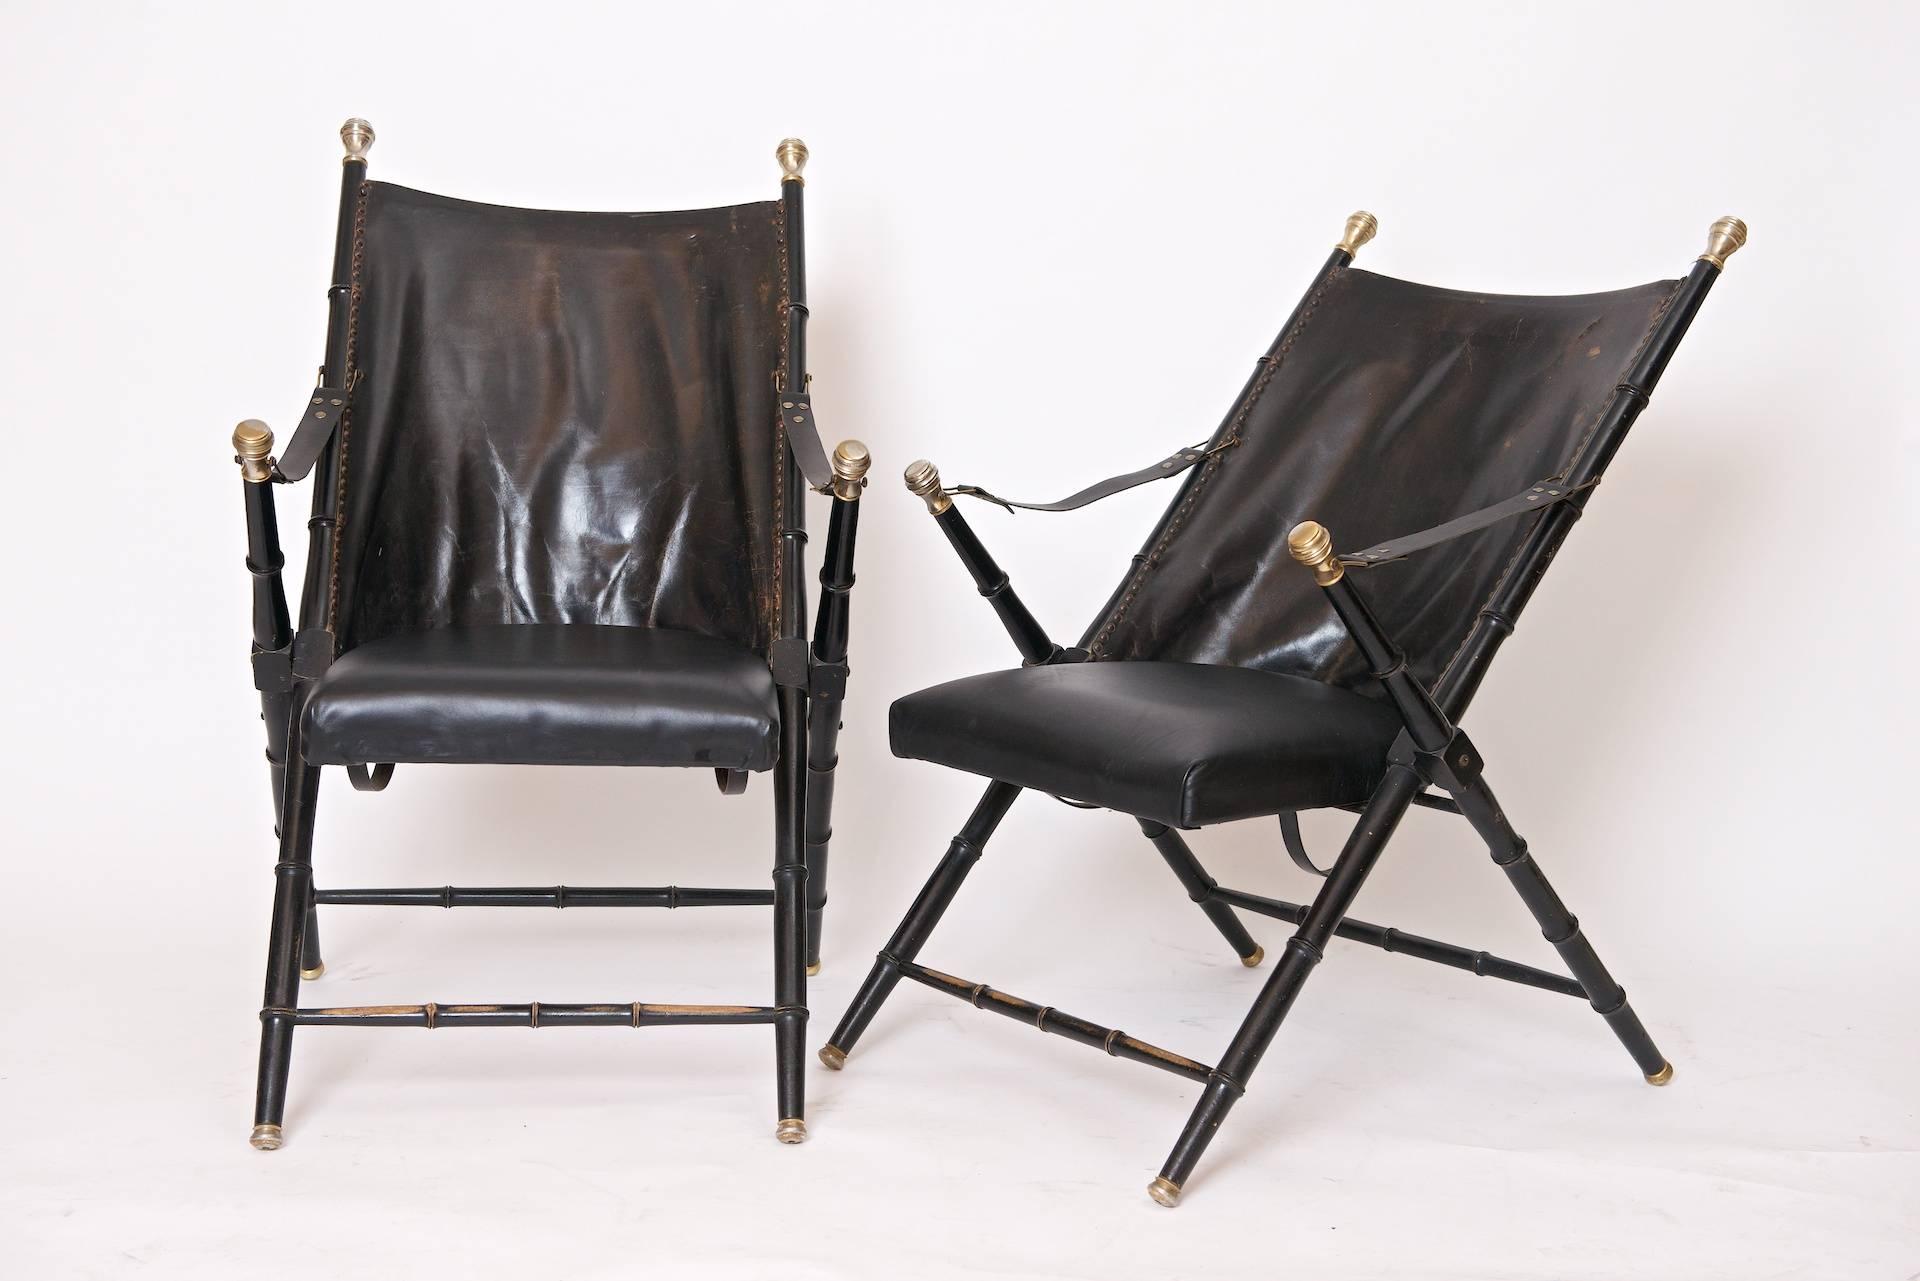 Pair of folding Campaign chairs by Valenti and made in Spain.

Leather, chrome and brass